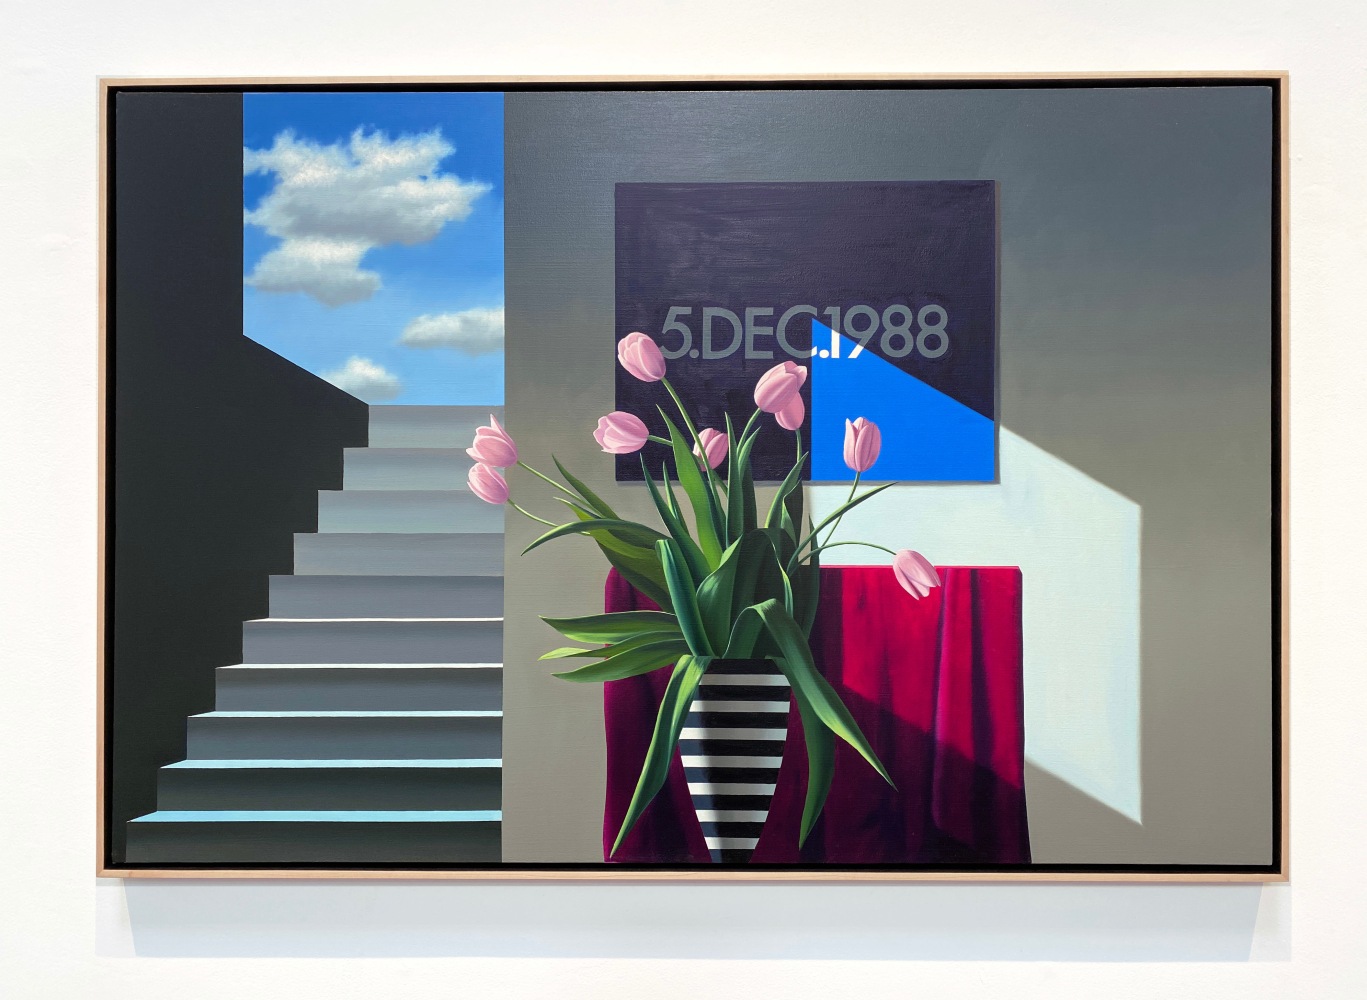 Interior with Pink Tulips and On Kawara, 2022
Oil on canvas
36 x 54 inches
COH096